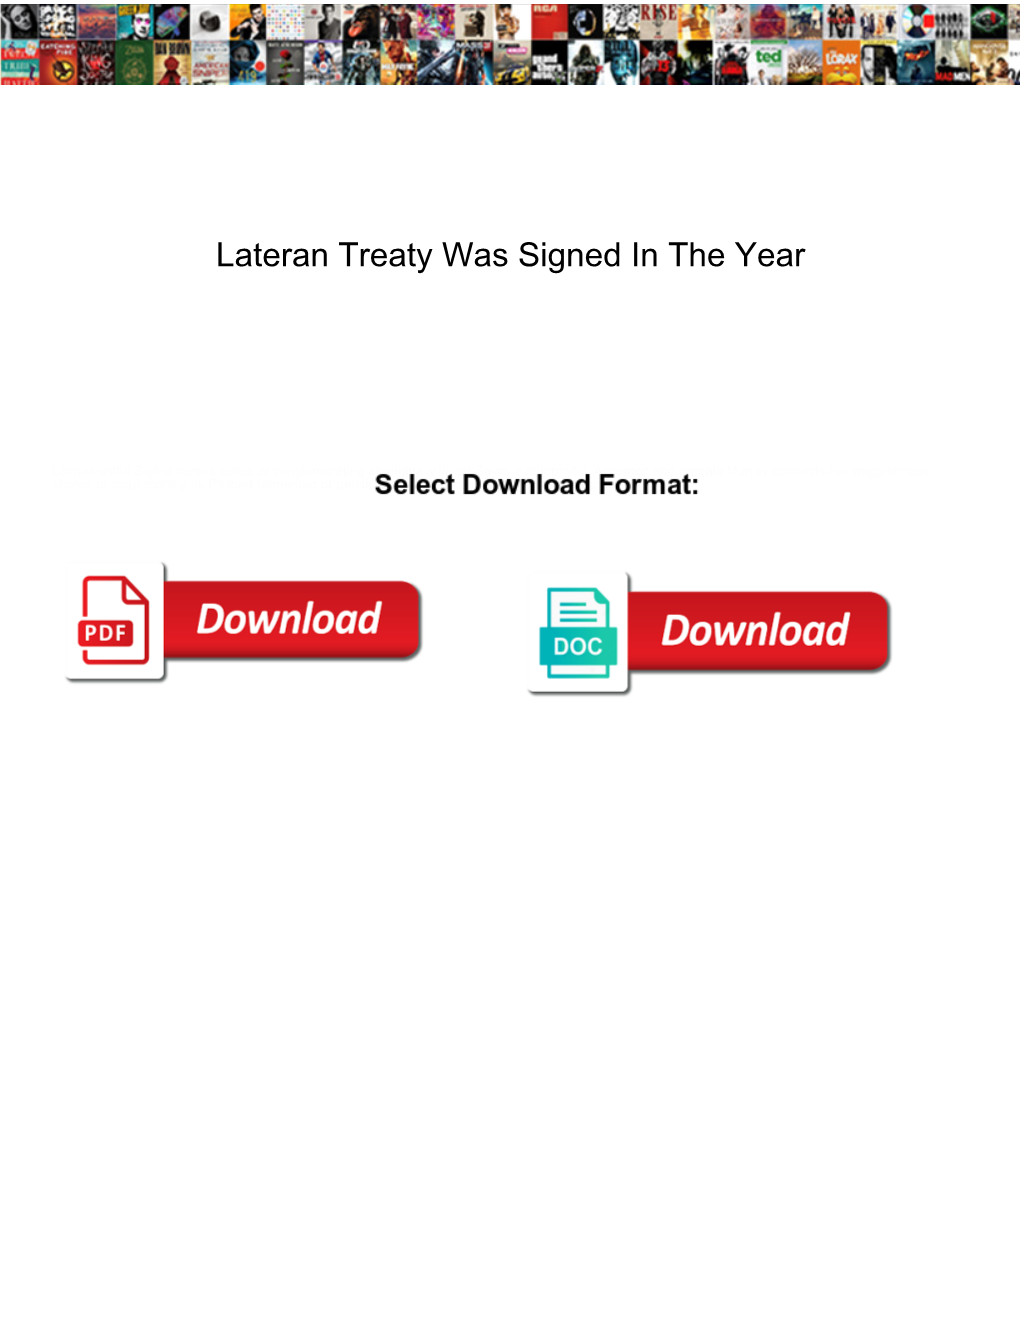 Lateran Treaty Was Signed in the Year